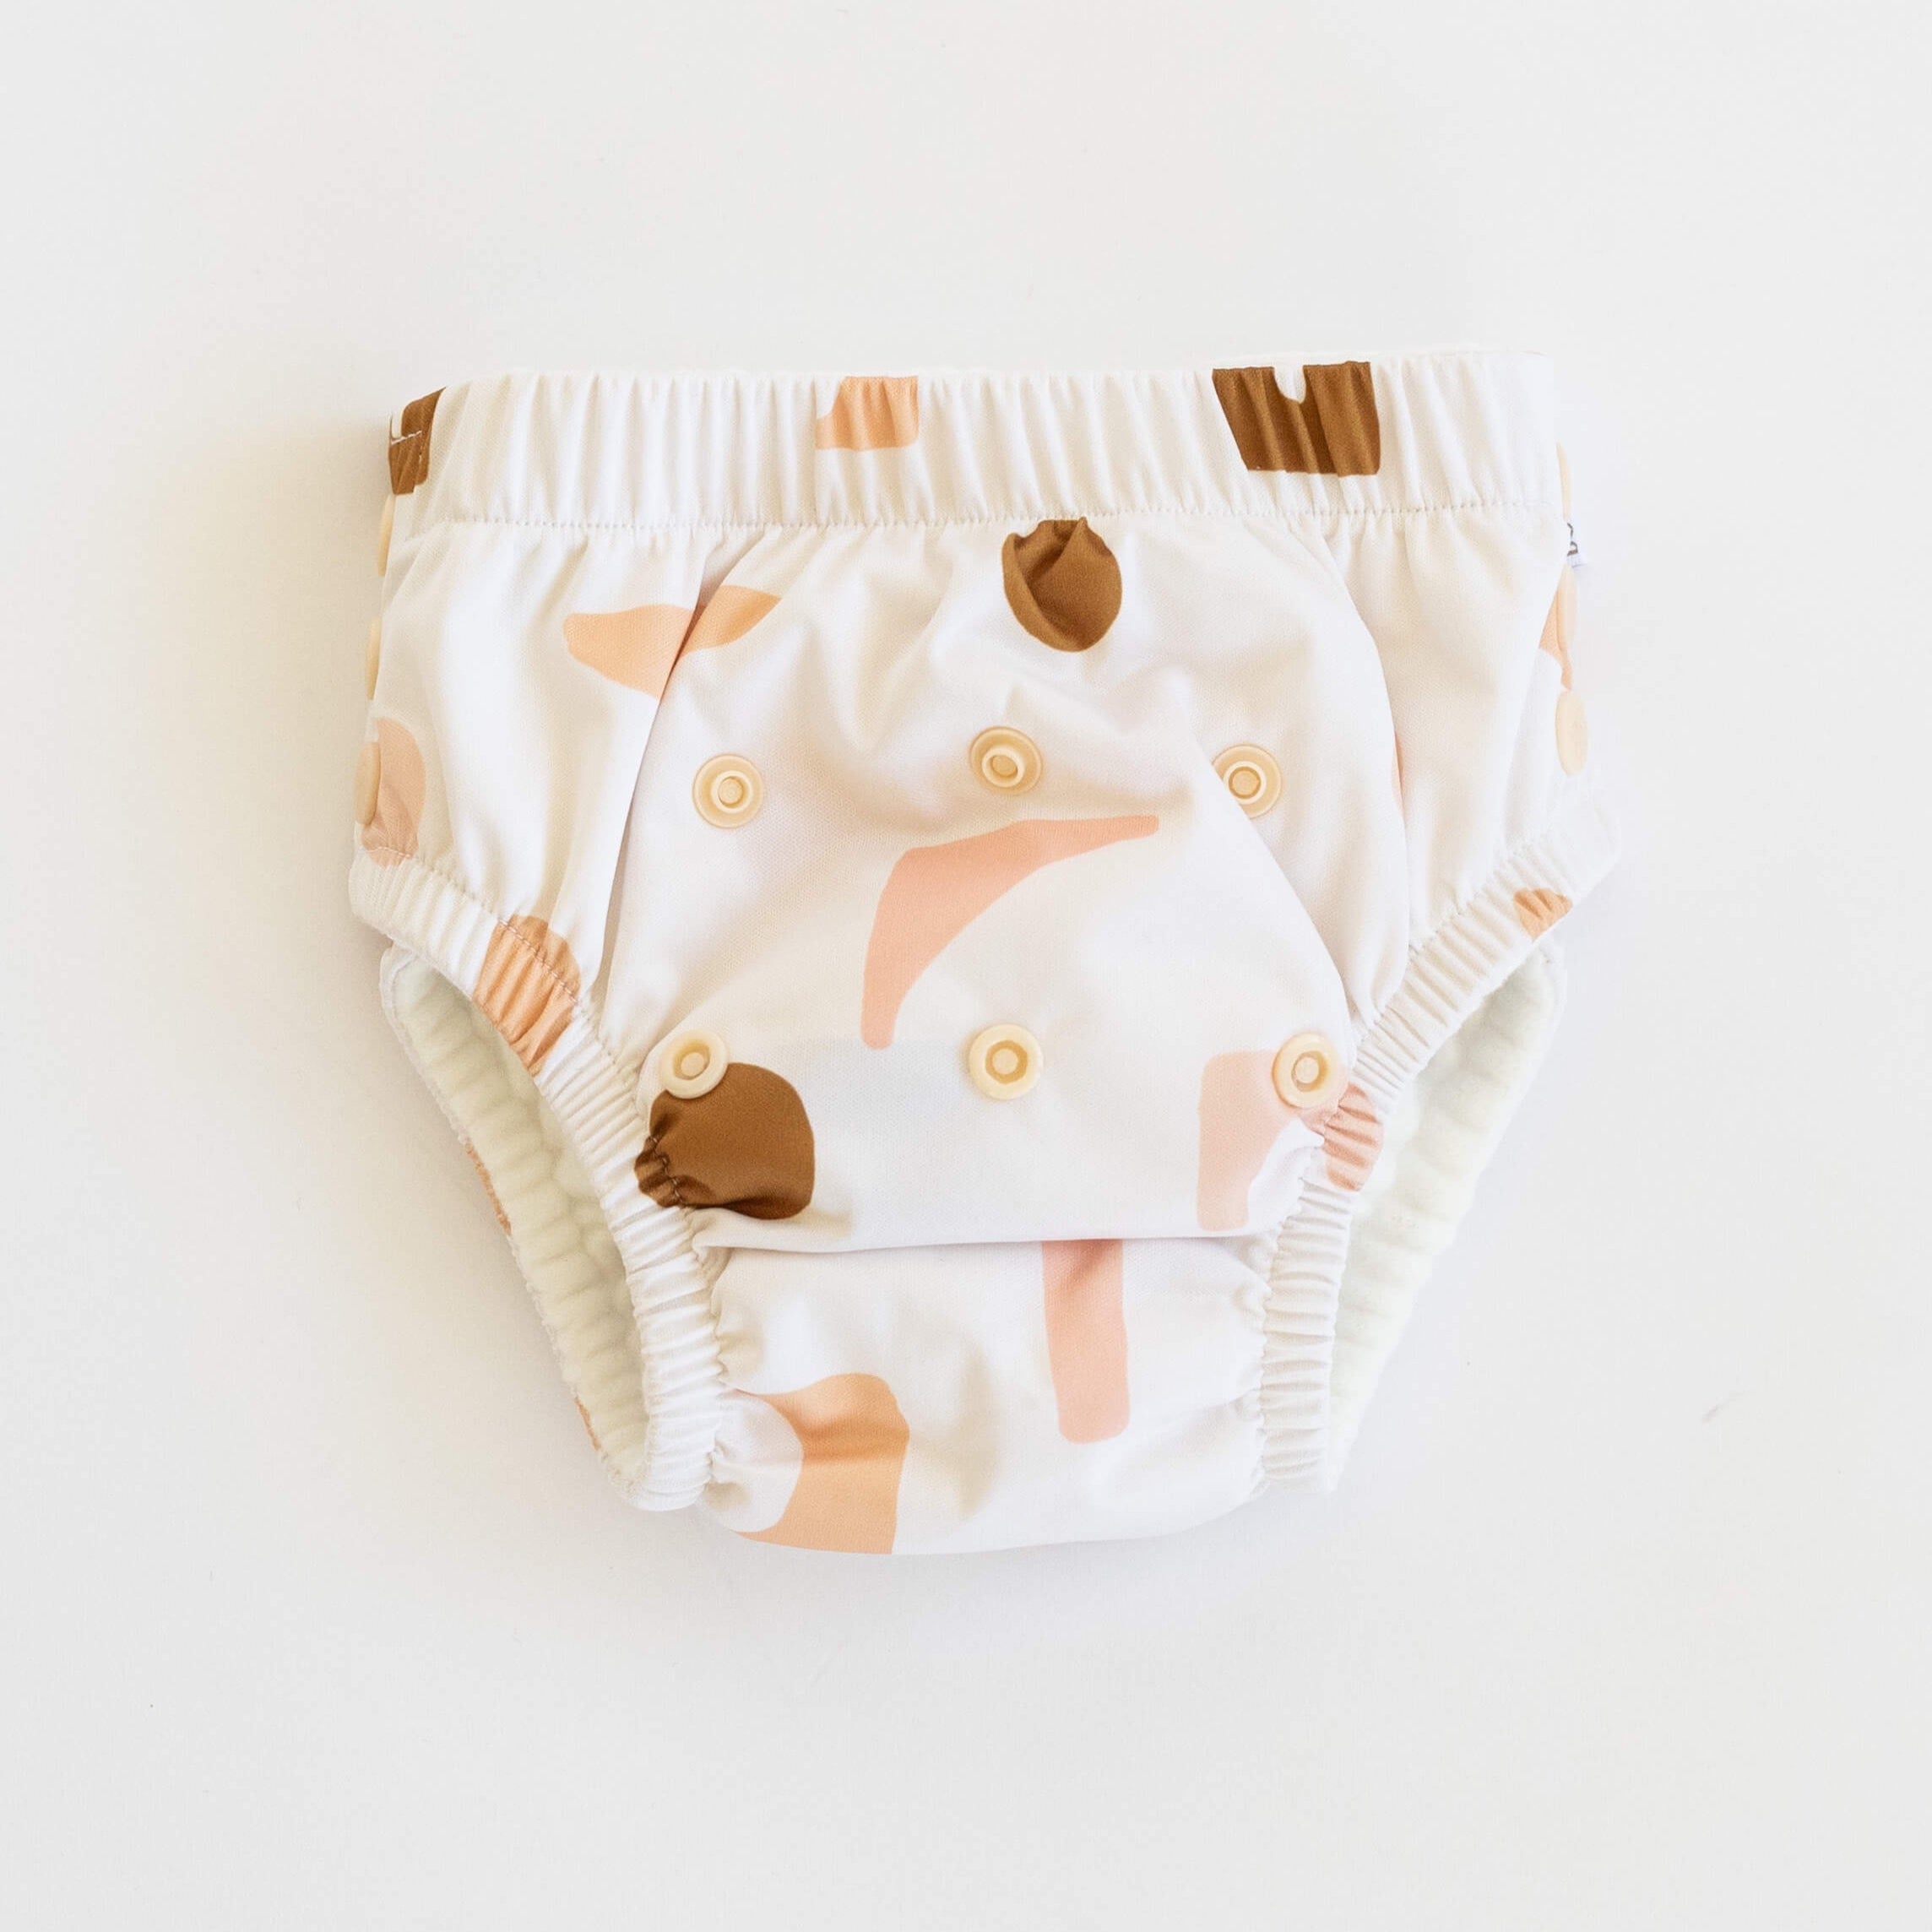 Reusable Modern Cloth Nappies and Baby Accessories